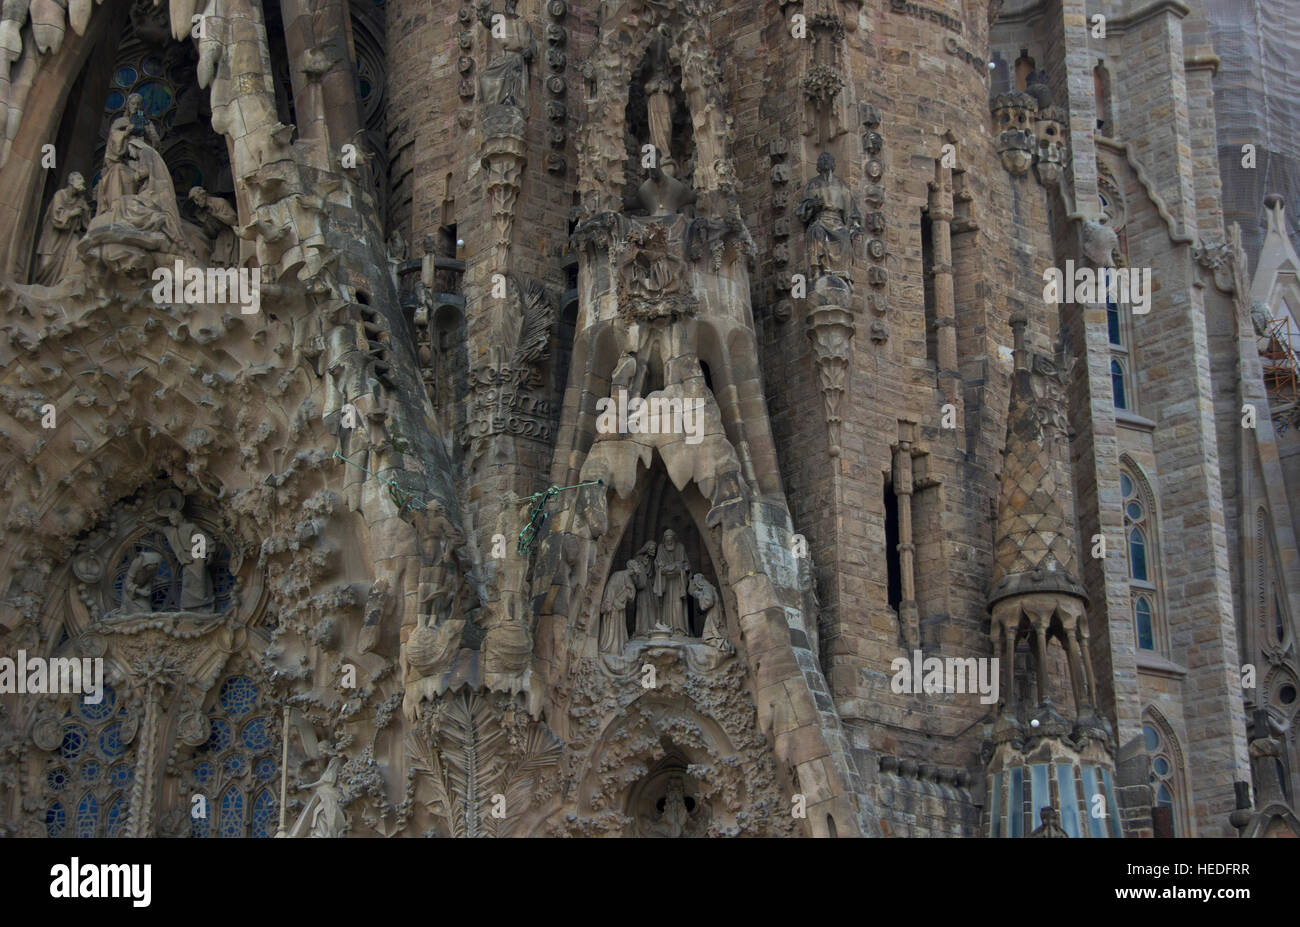 Sacred Family. Famous church under construction in Barcelona. Spain. Stock Photo